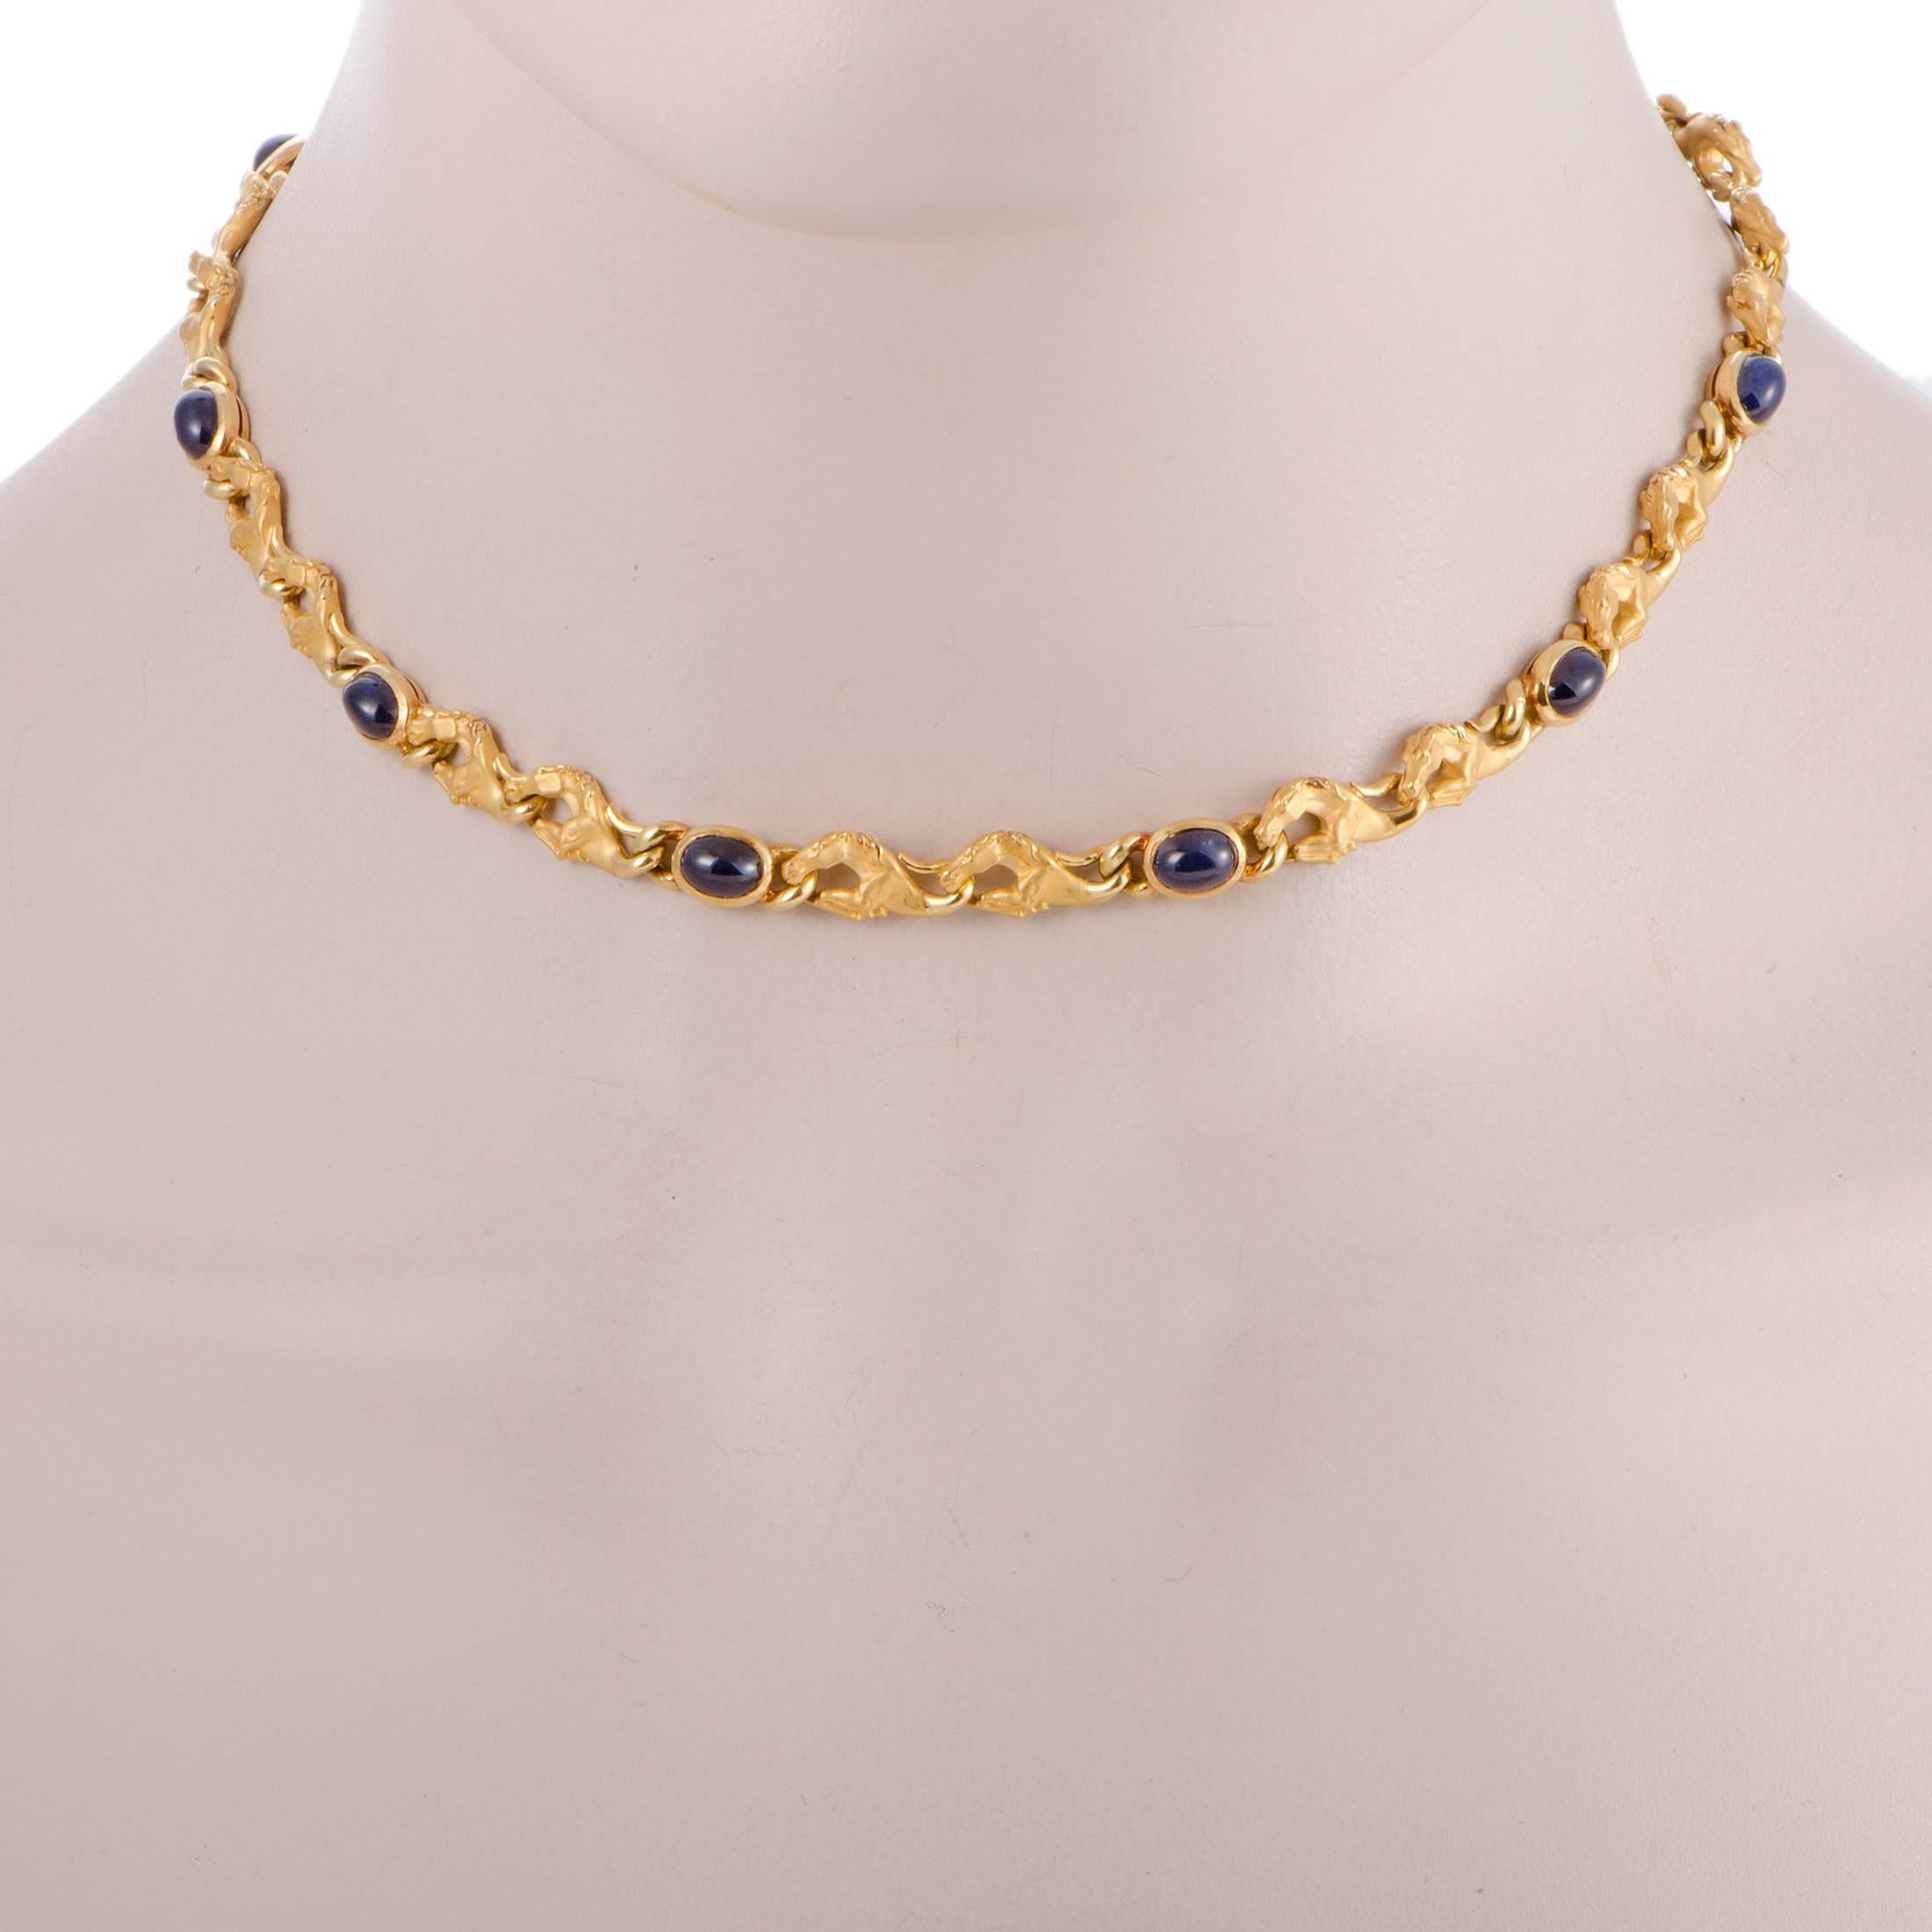 Characterized by leaping horse links and accented with cabochon sapphires, this 18K yellow gold necklace by Carrera y Carrera thrills your future fashion maven with an abundance of graceful charm. Appear elegant and charming and highlight your